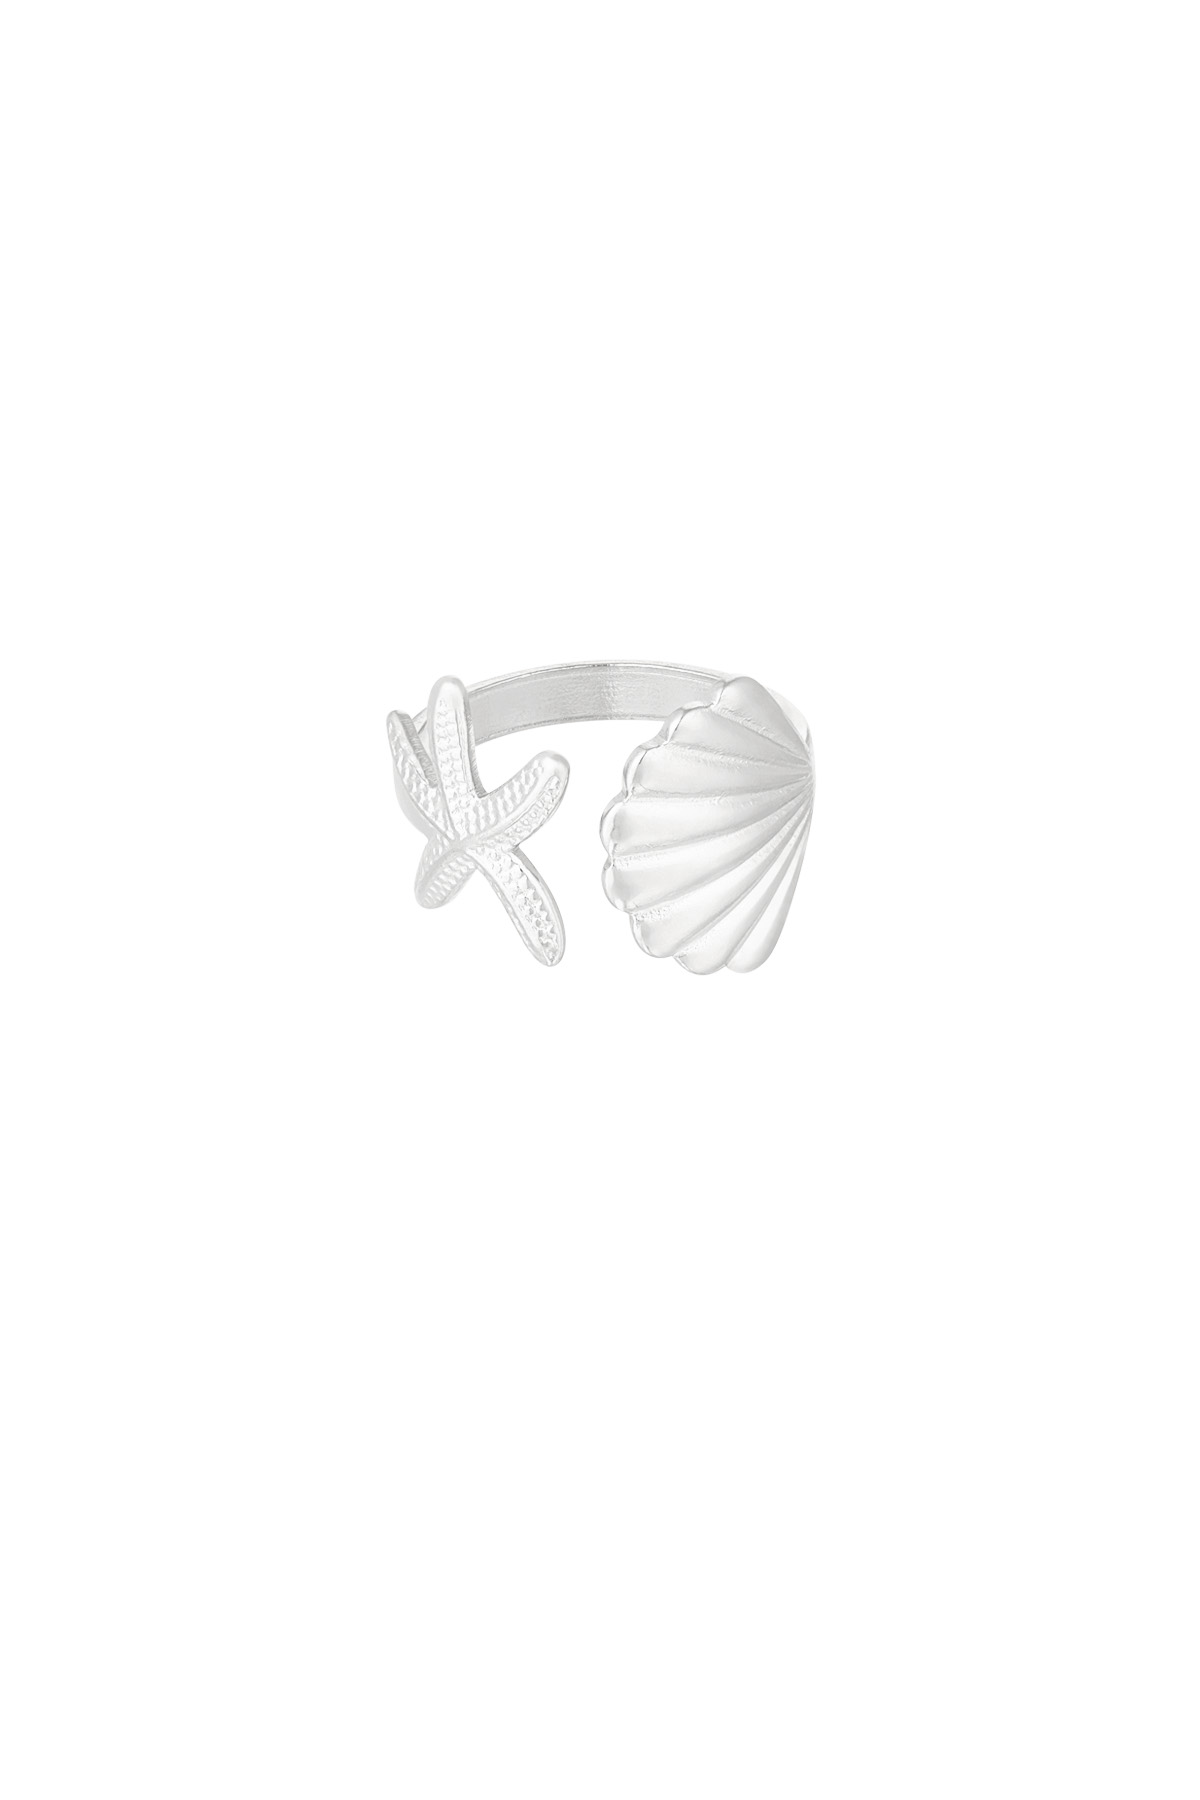 Ring sea shell vibes - zilver 